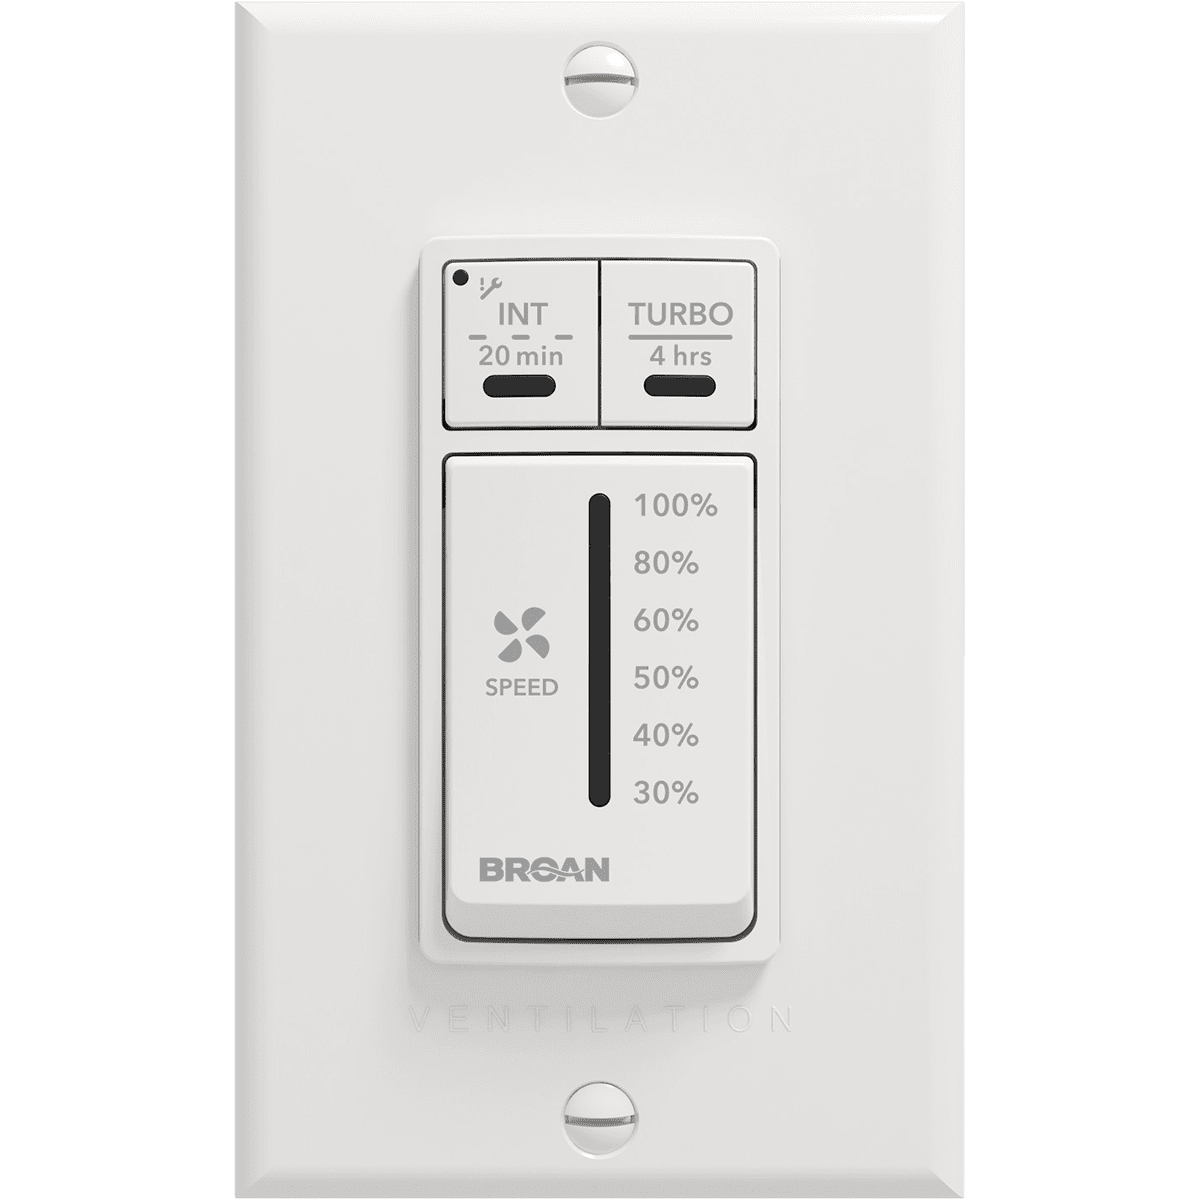 Broan Speed Selector Wall Control for AI Series Fresh Air Systems